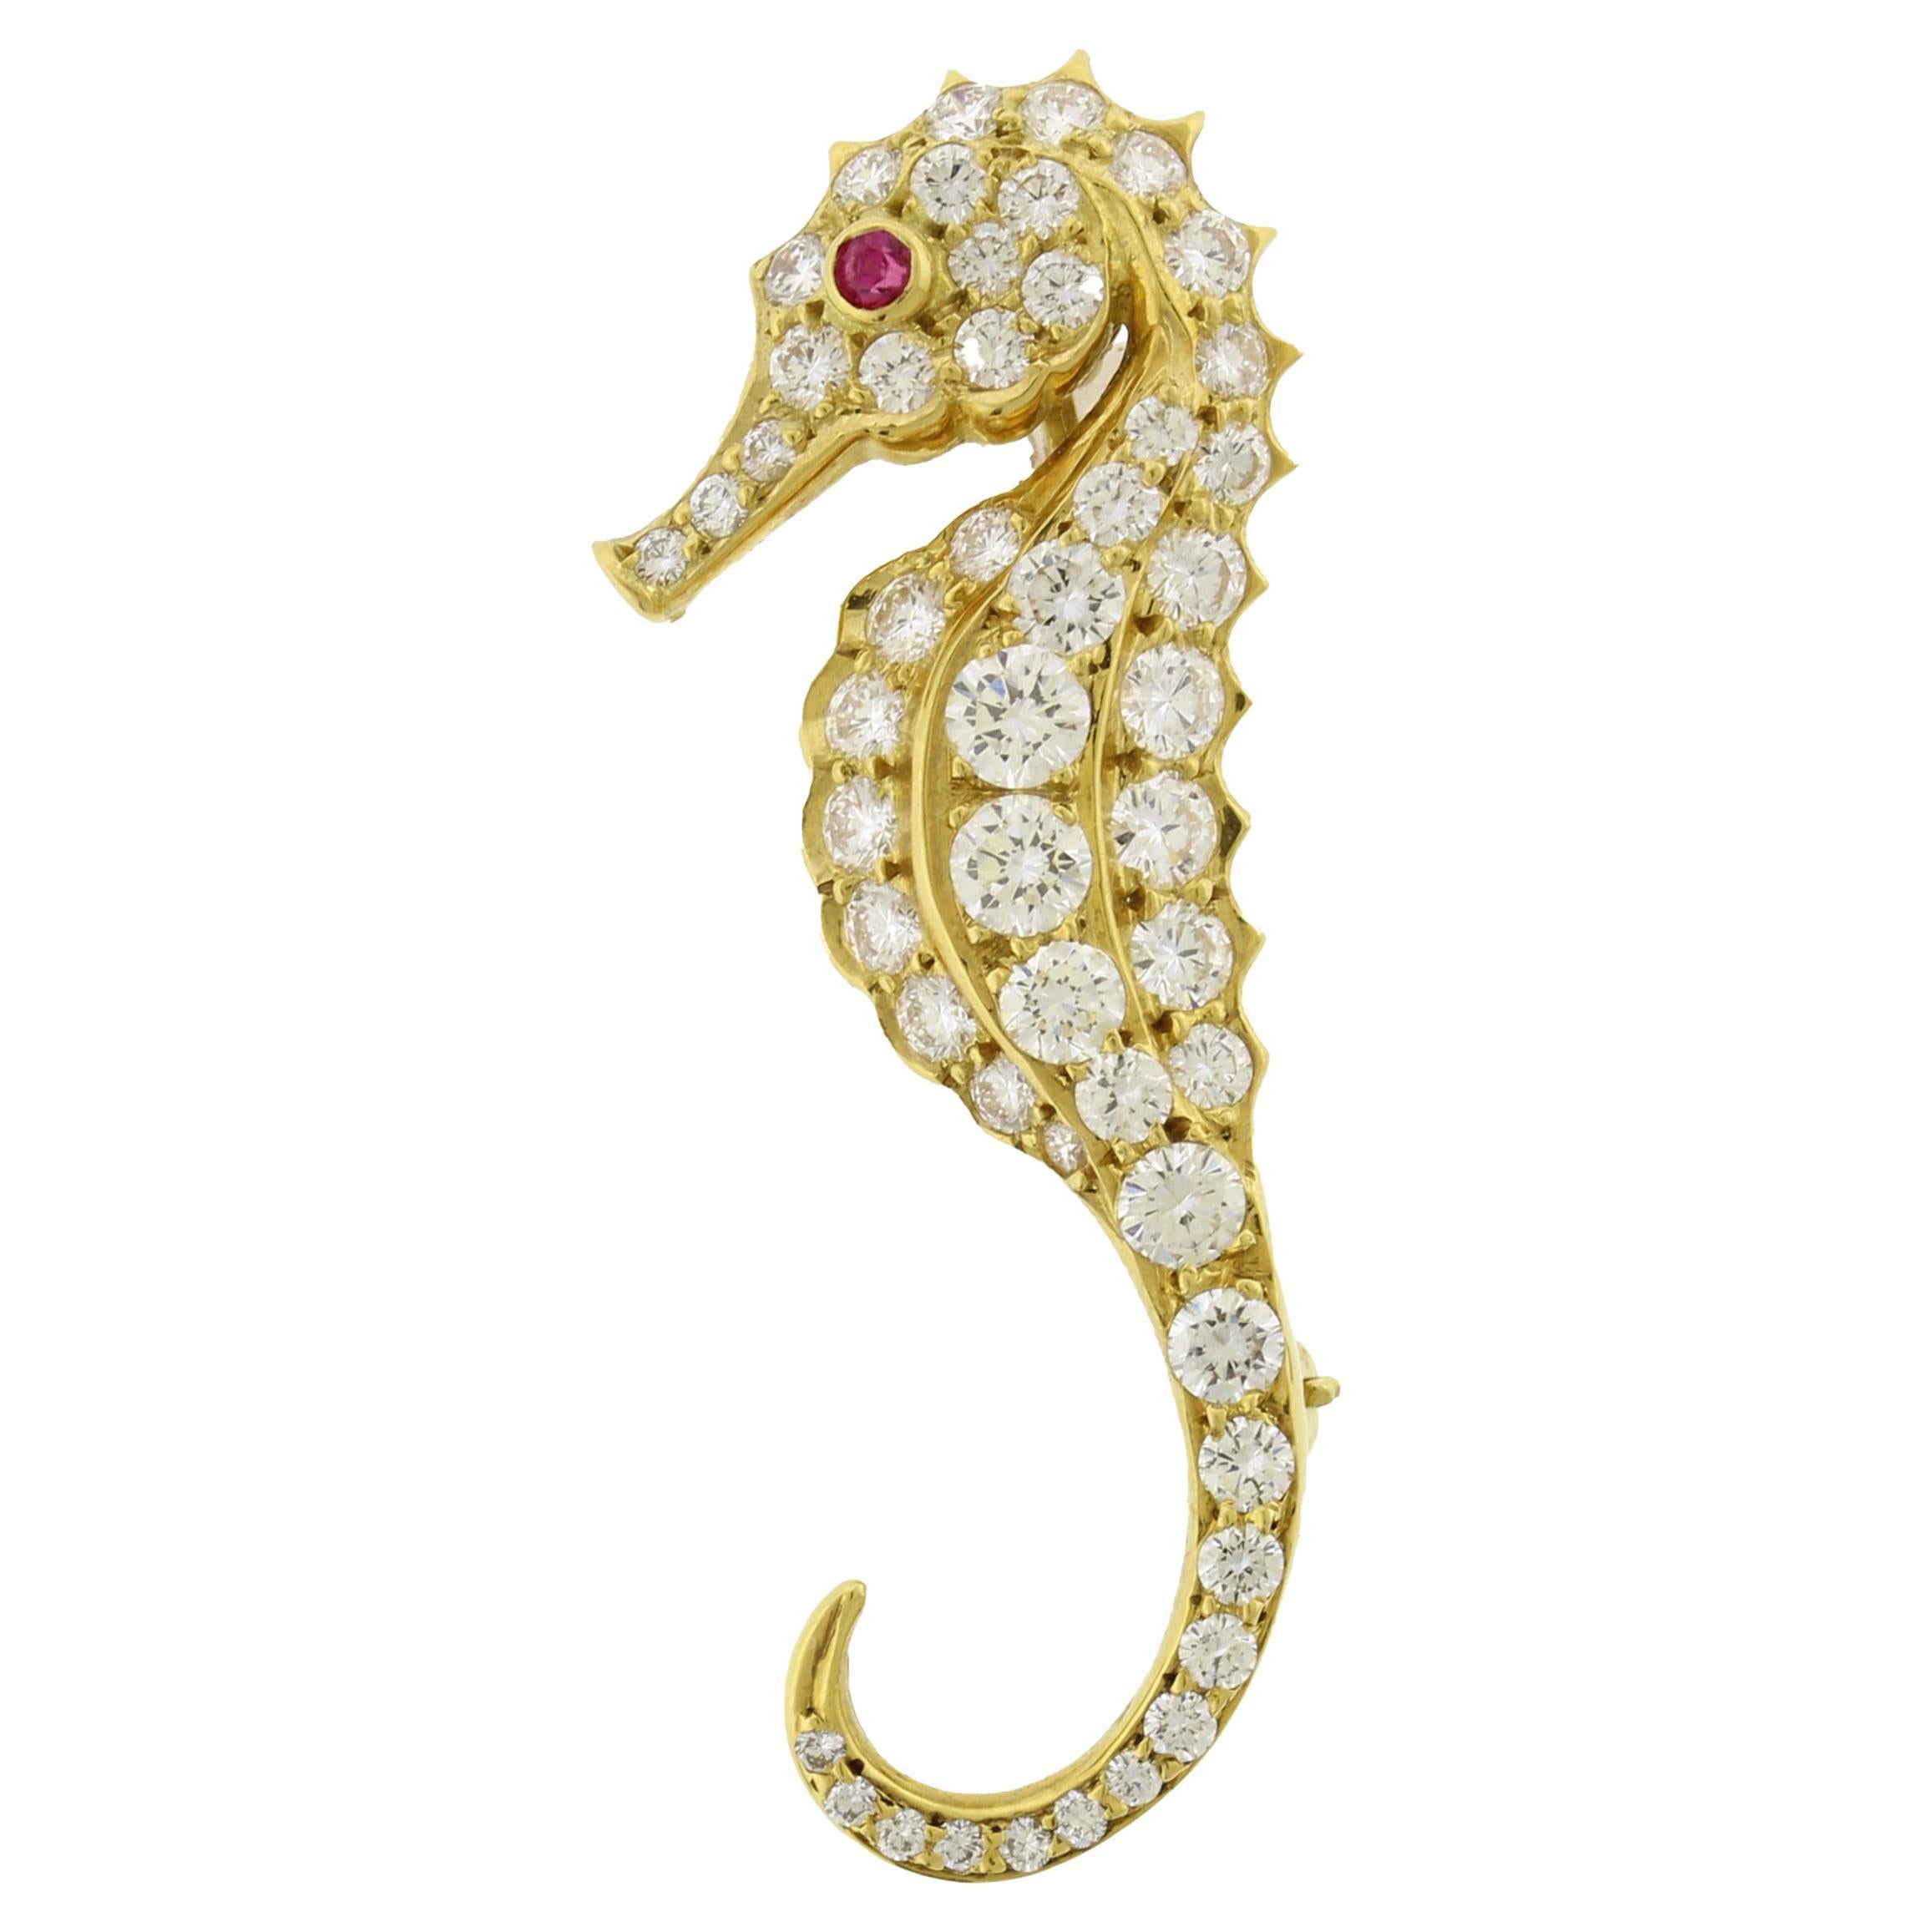 Diamond and Ruby Seahorse Brooch by Pampillonia Jewelers For Sale